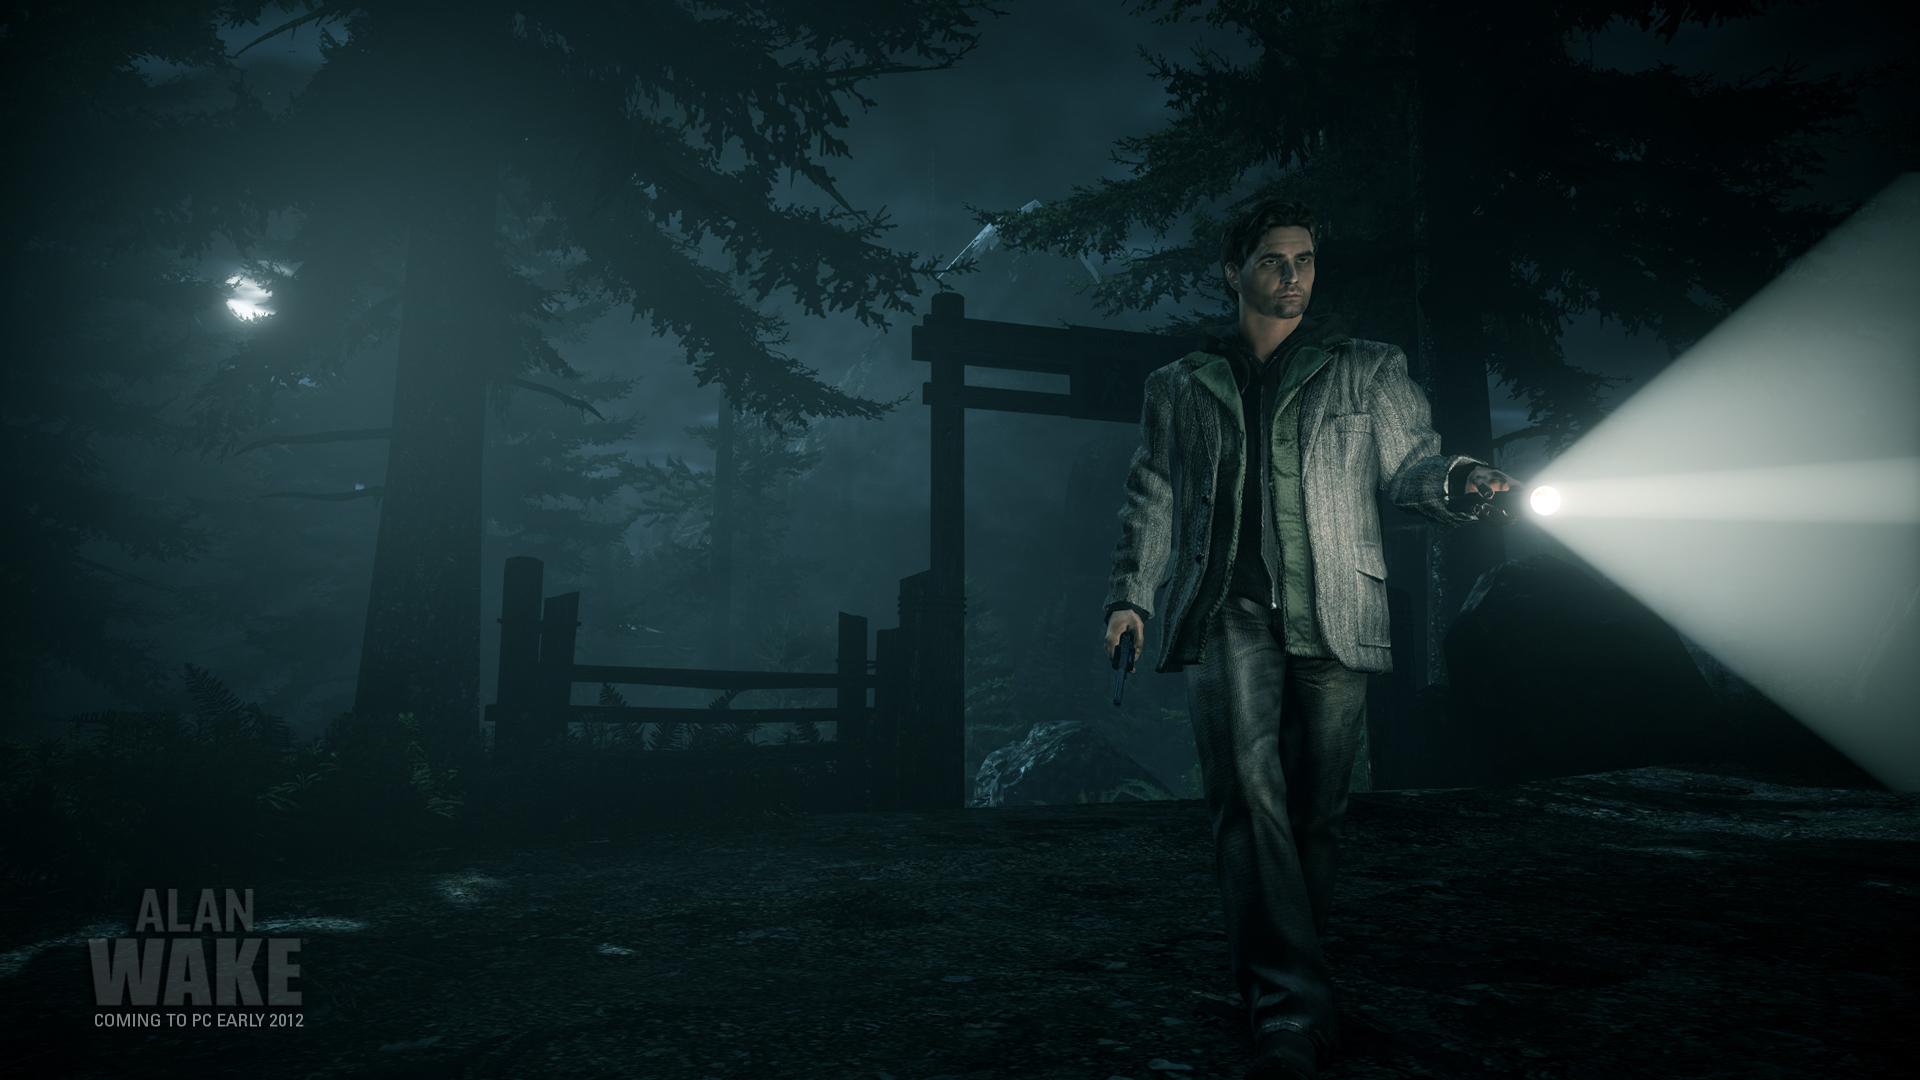 Alan Wake 2: How Long To Beat? Main Story & Completionist